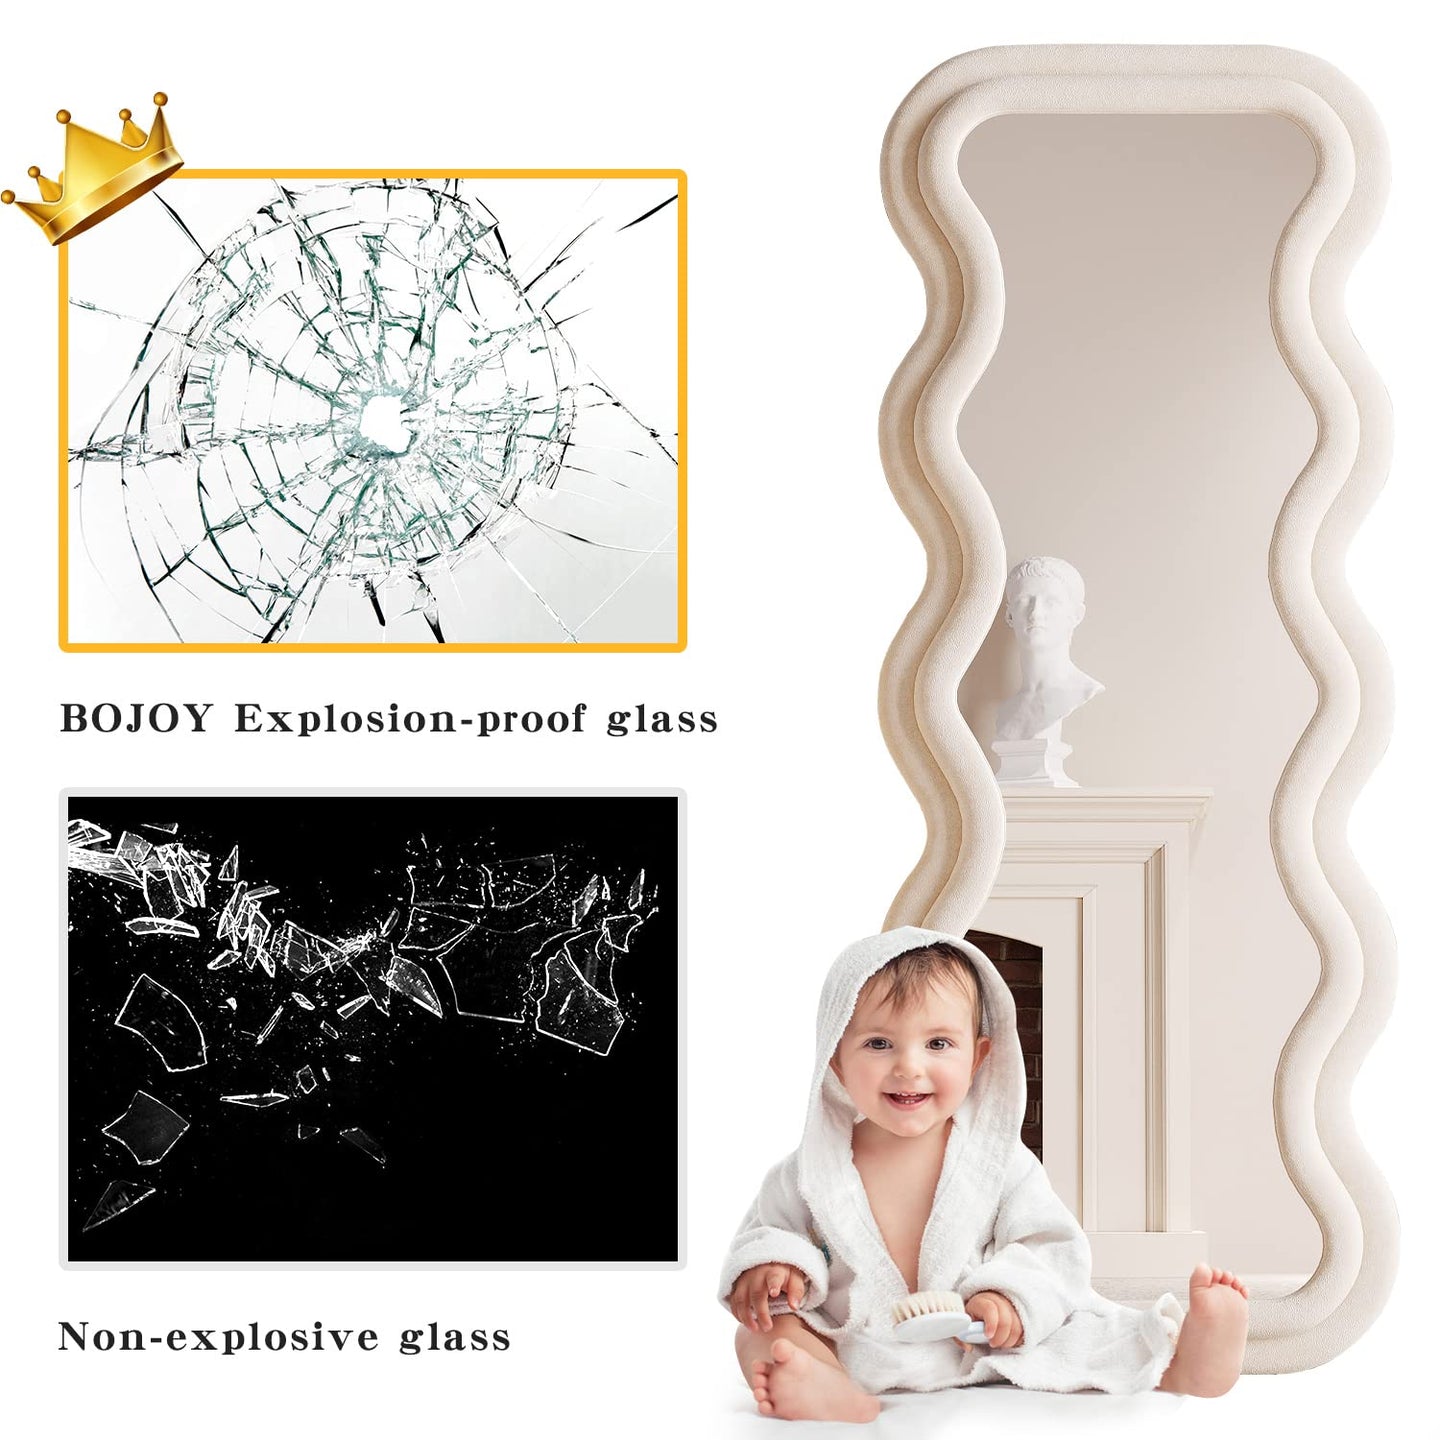 BOJOY Full Length Mirror 63"x24", Irregular Wavy Mirror, Arched Floor Mirror, Wall Mirror Standing Hanging or Leaning Against Wall for Bedroom, Flannel Wrapped Wooden Frame Mirror -White